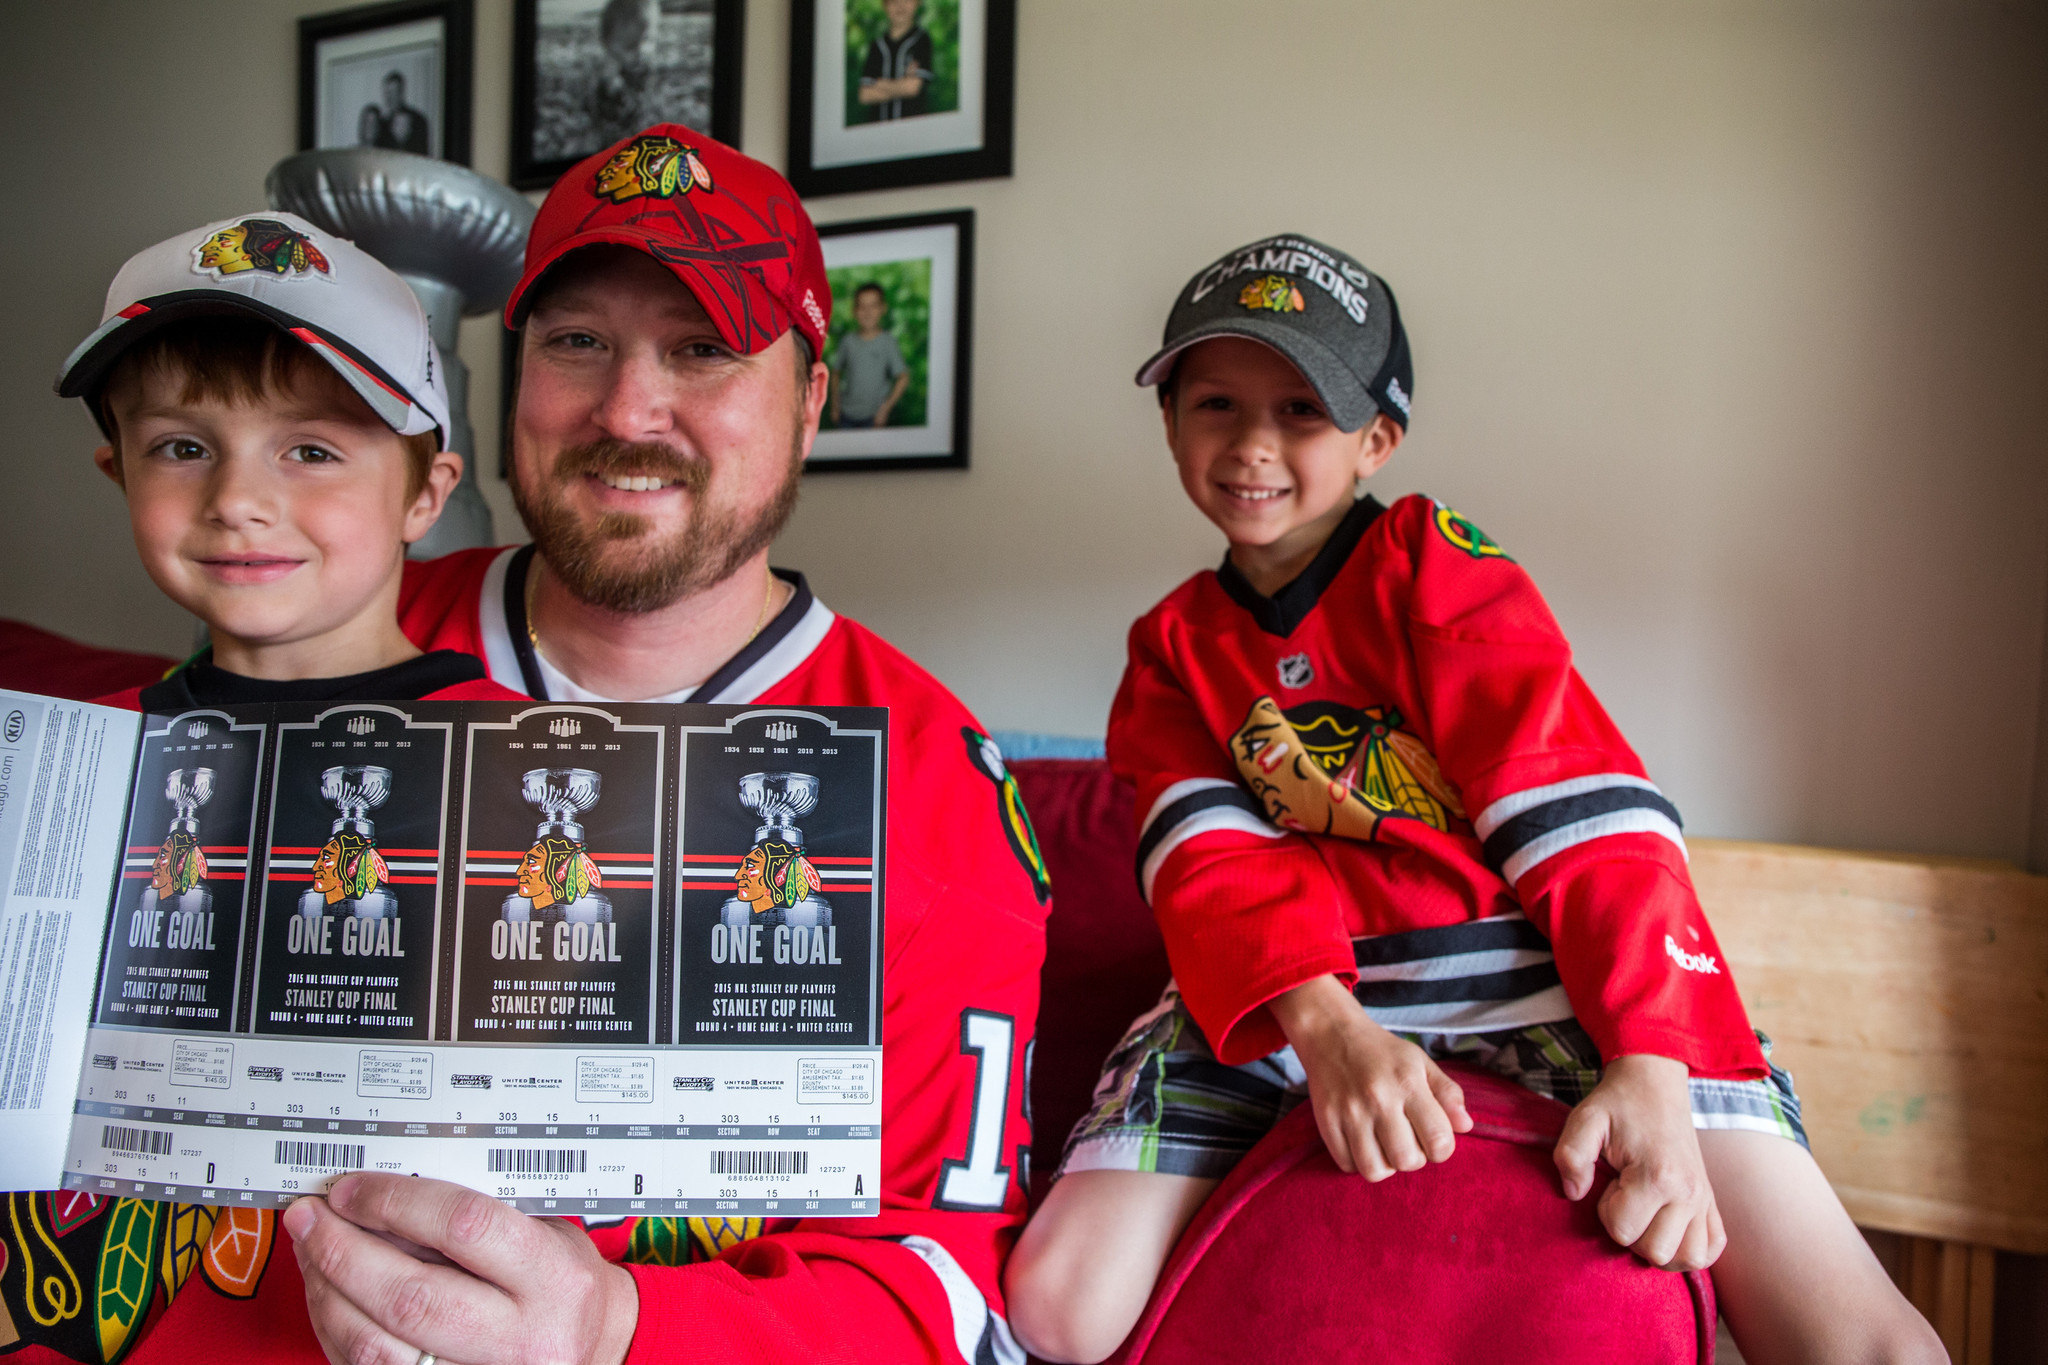 Blackhawks tickets: To sell or not to sell? - Chicago Tribune